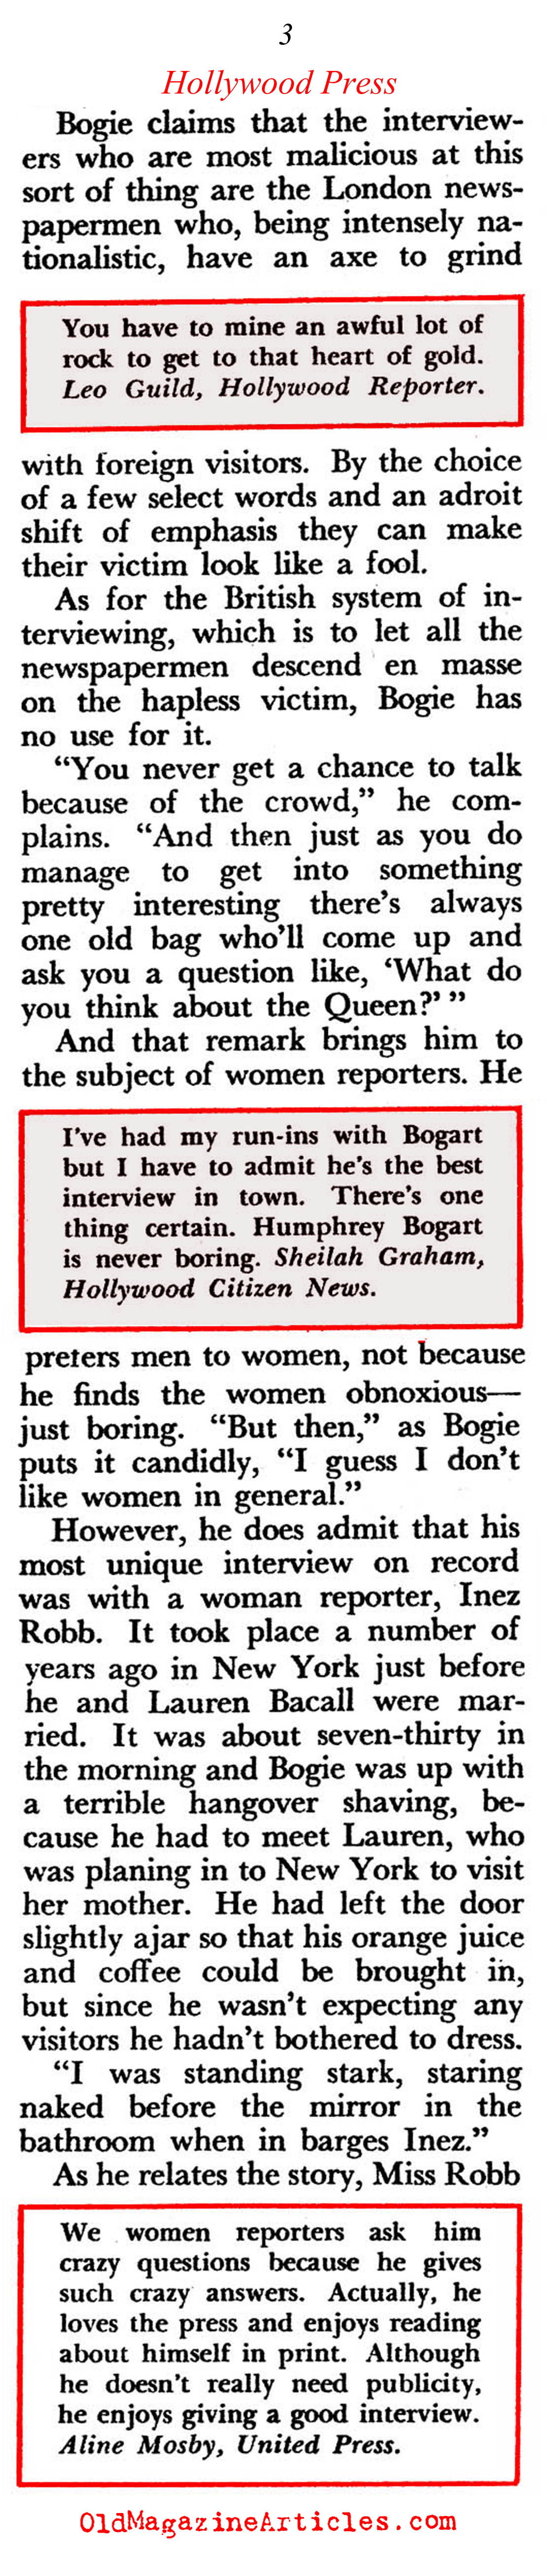 Humphrey Bogart and his Feud with the Hollywood Press (Pageant Magazine, 1956)